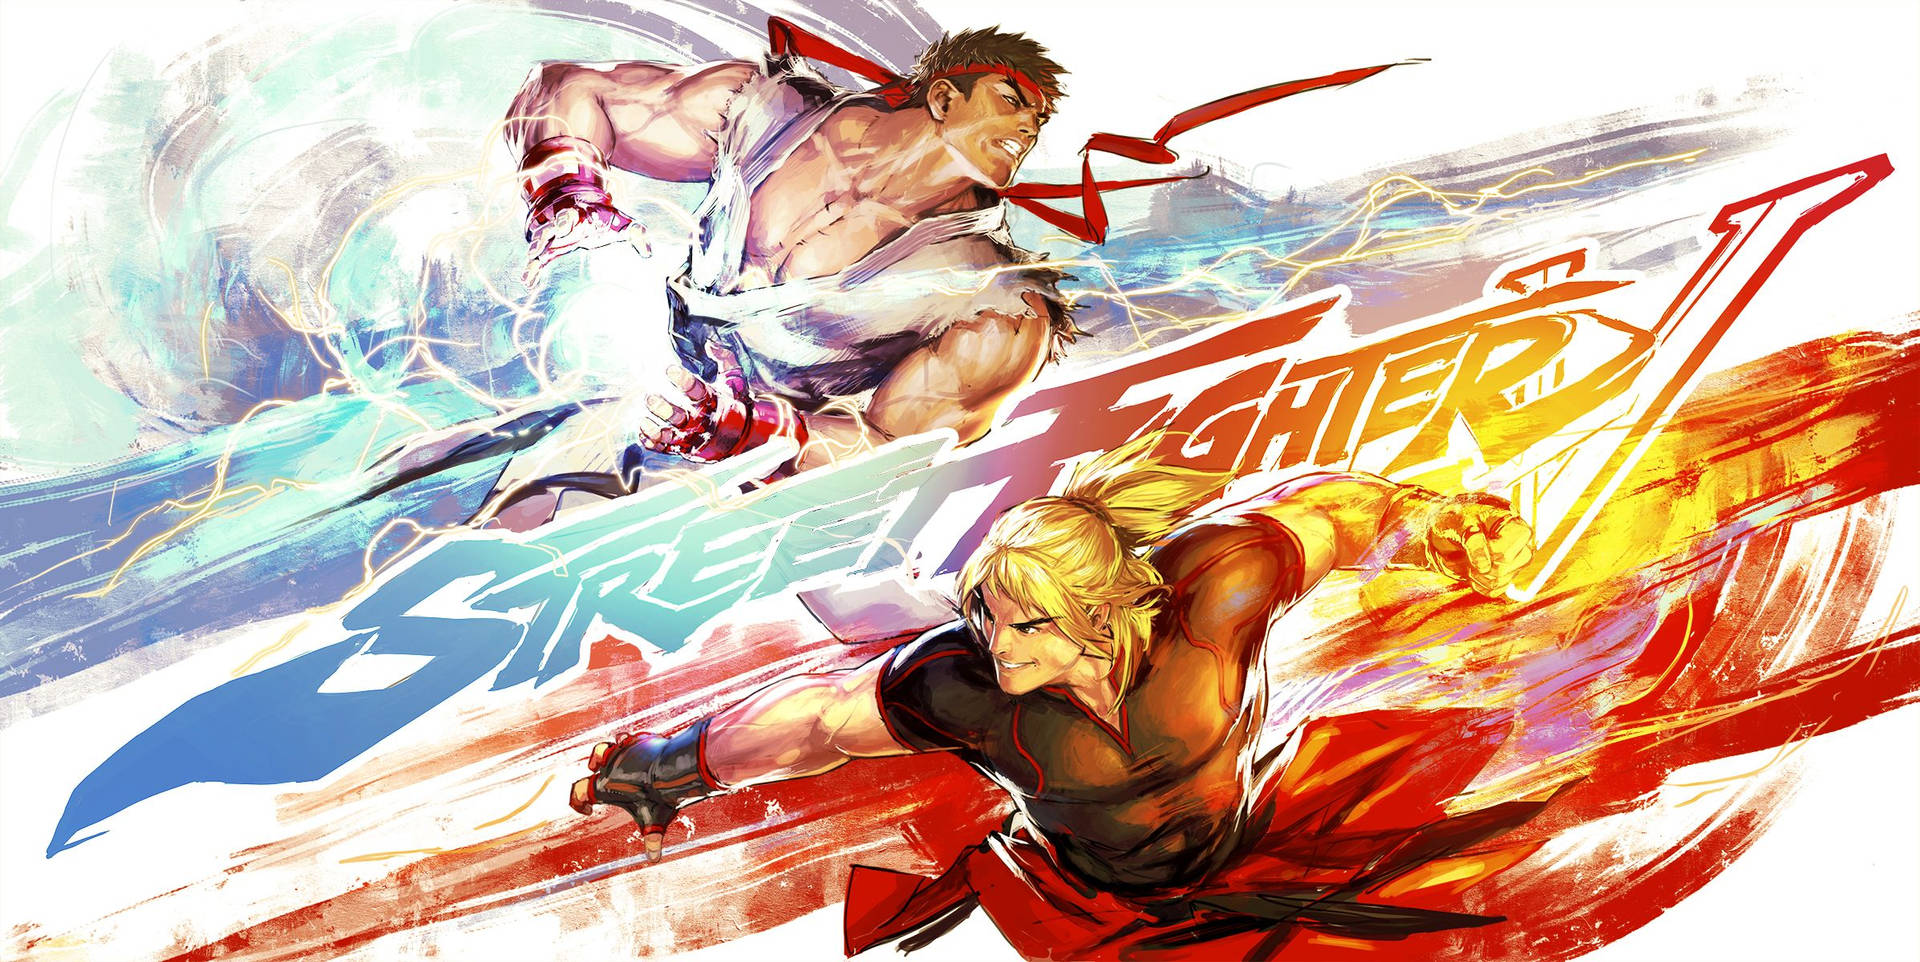 Street Fighter Duel Preview Official Artwork New Trailer Features  Virtual Yoshinori Ono  TFG Fighting Game News